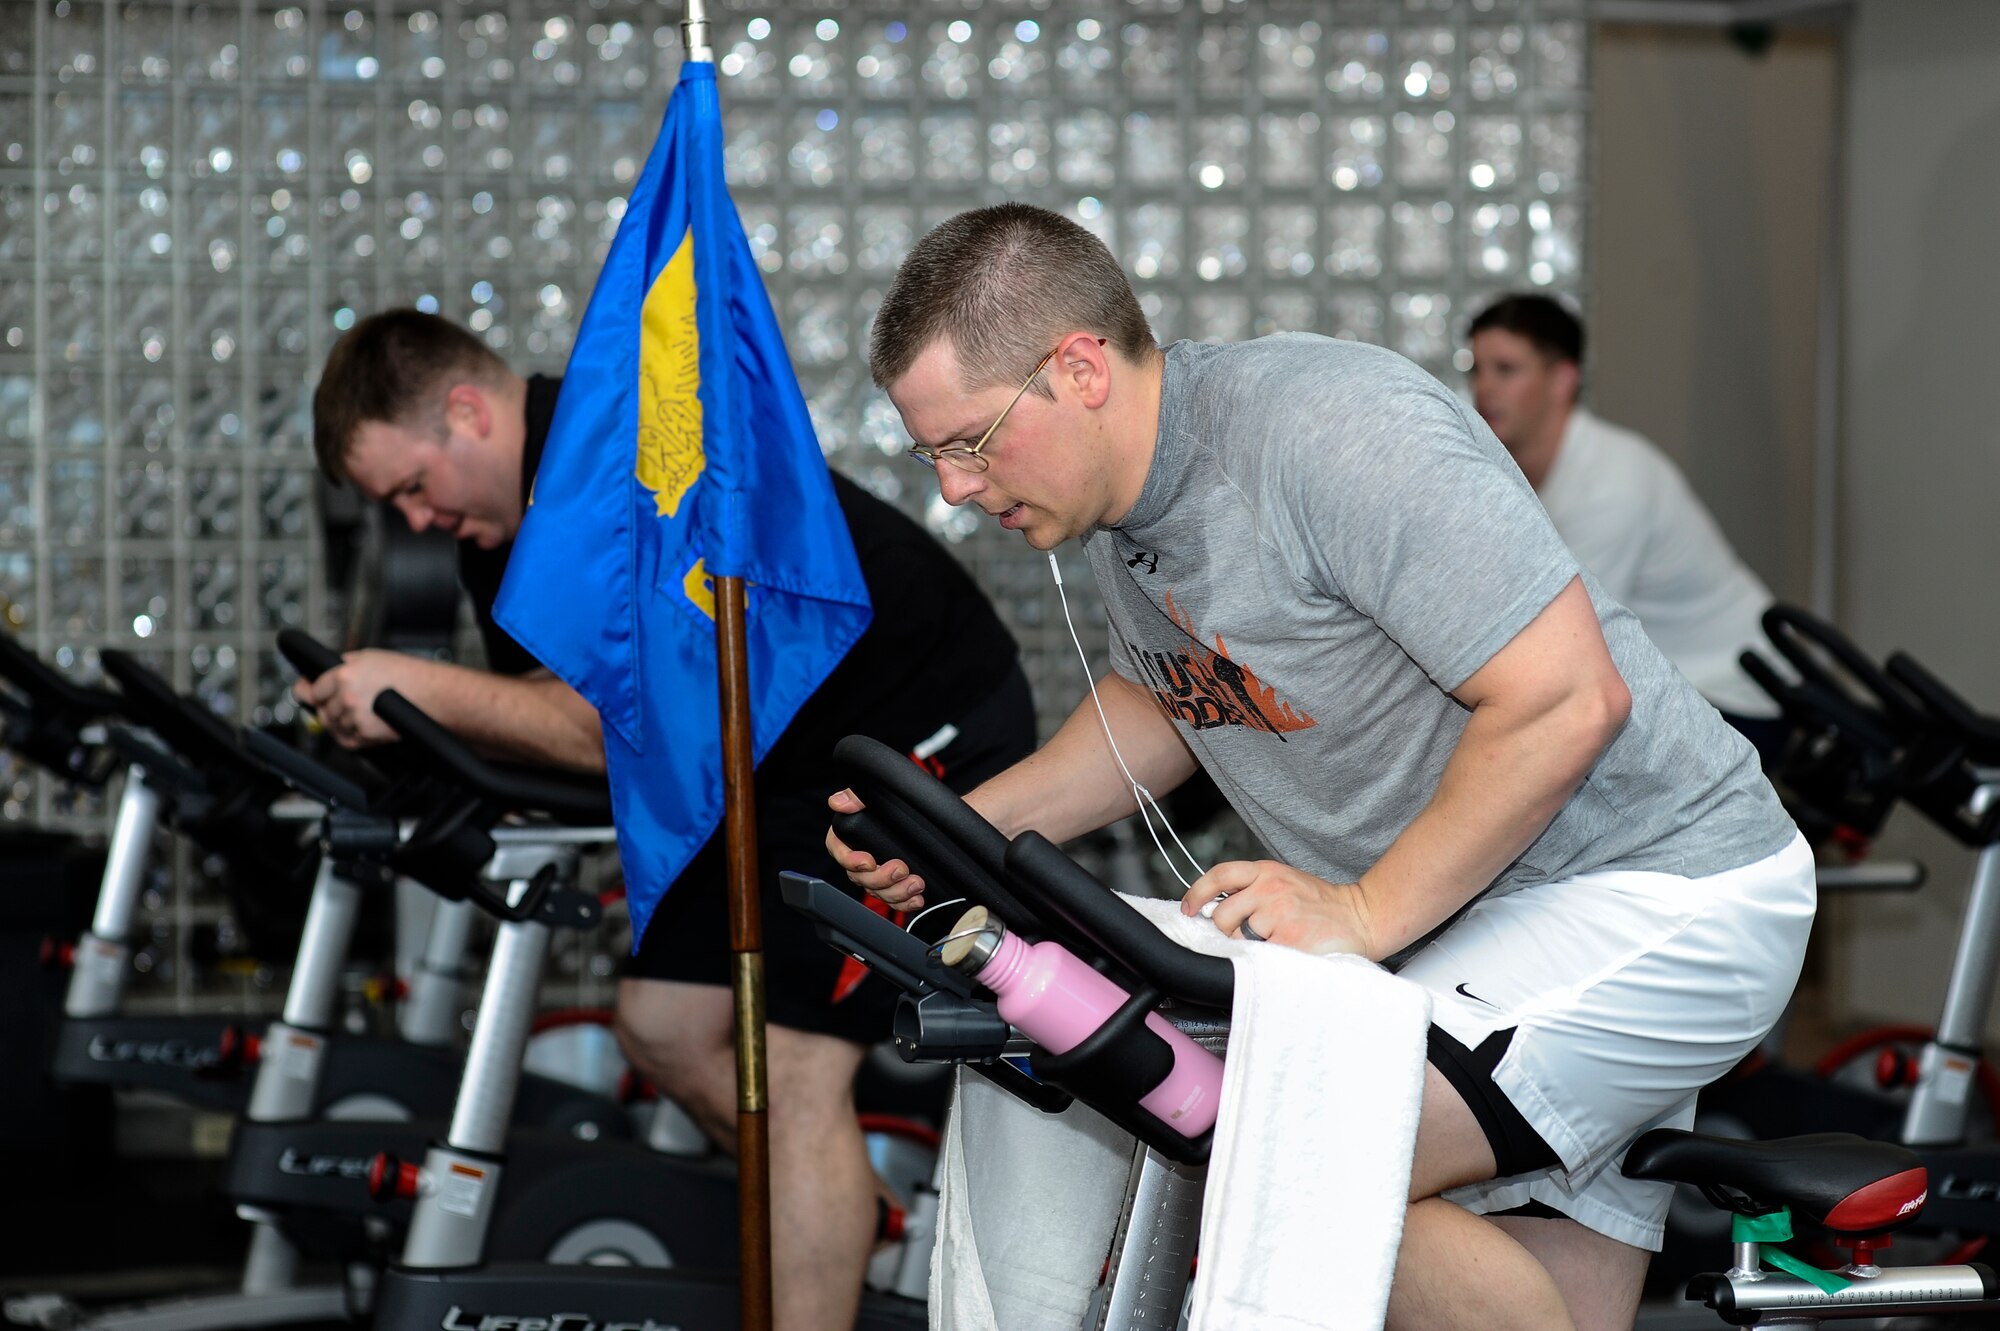 Team Buckley members work up a sweat during Buckley’s annual Spin-A-Thon, April 11, 2014, at the fitness center on Buckley Air Force Base, Colo. Every hour, one person from each 460th Space Wing unit participated in a 45-minute spin class, competing for Commander’s Cup points. (U.S. Air Force photo by Airman 1st Class Samantha Saulsbury/Released)